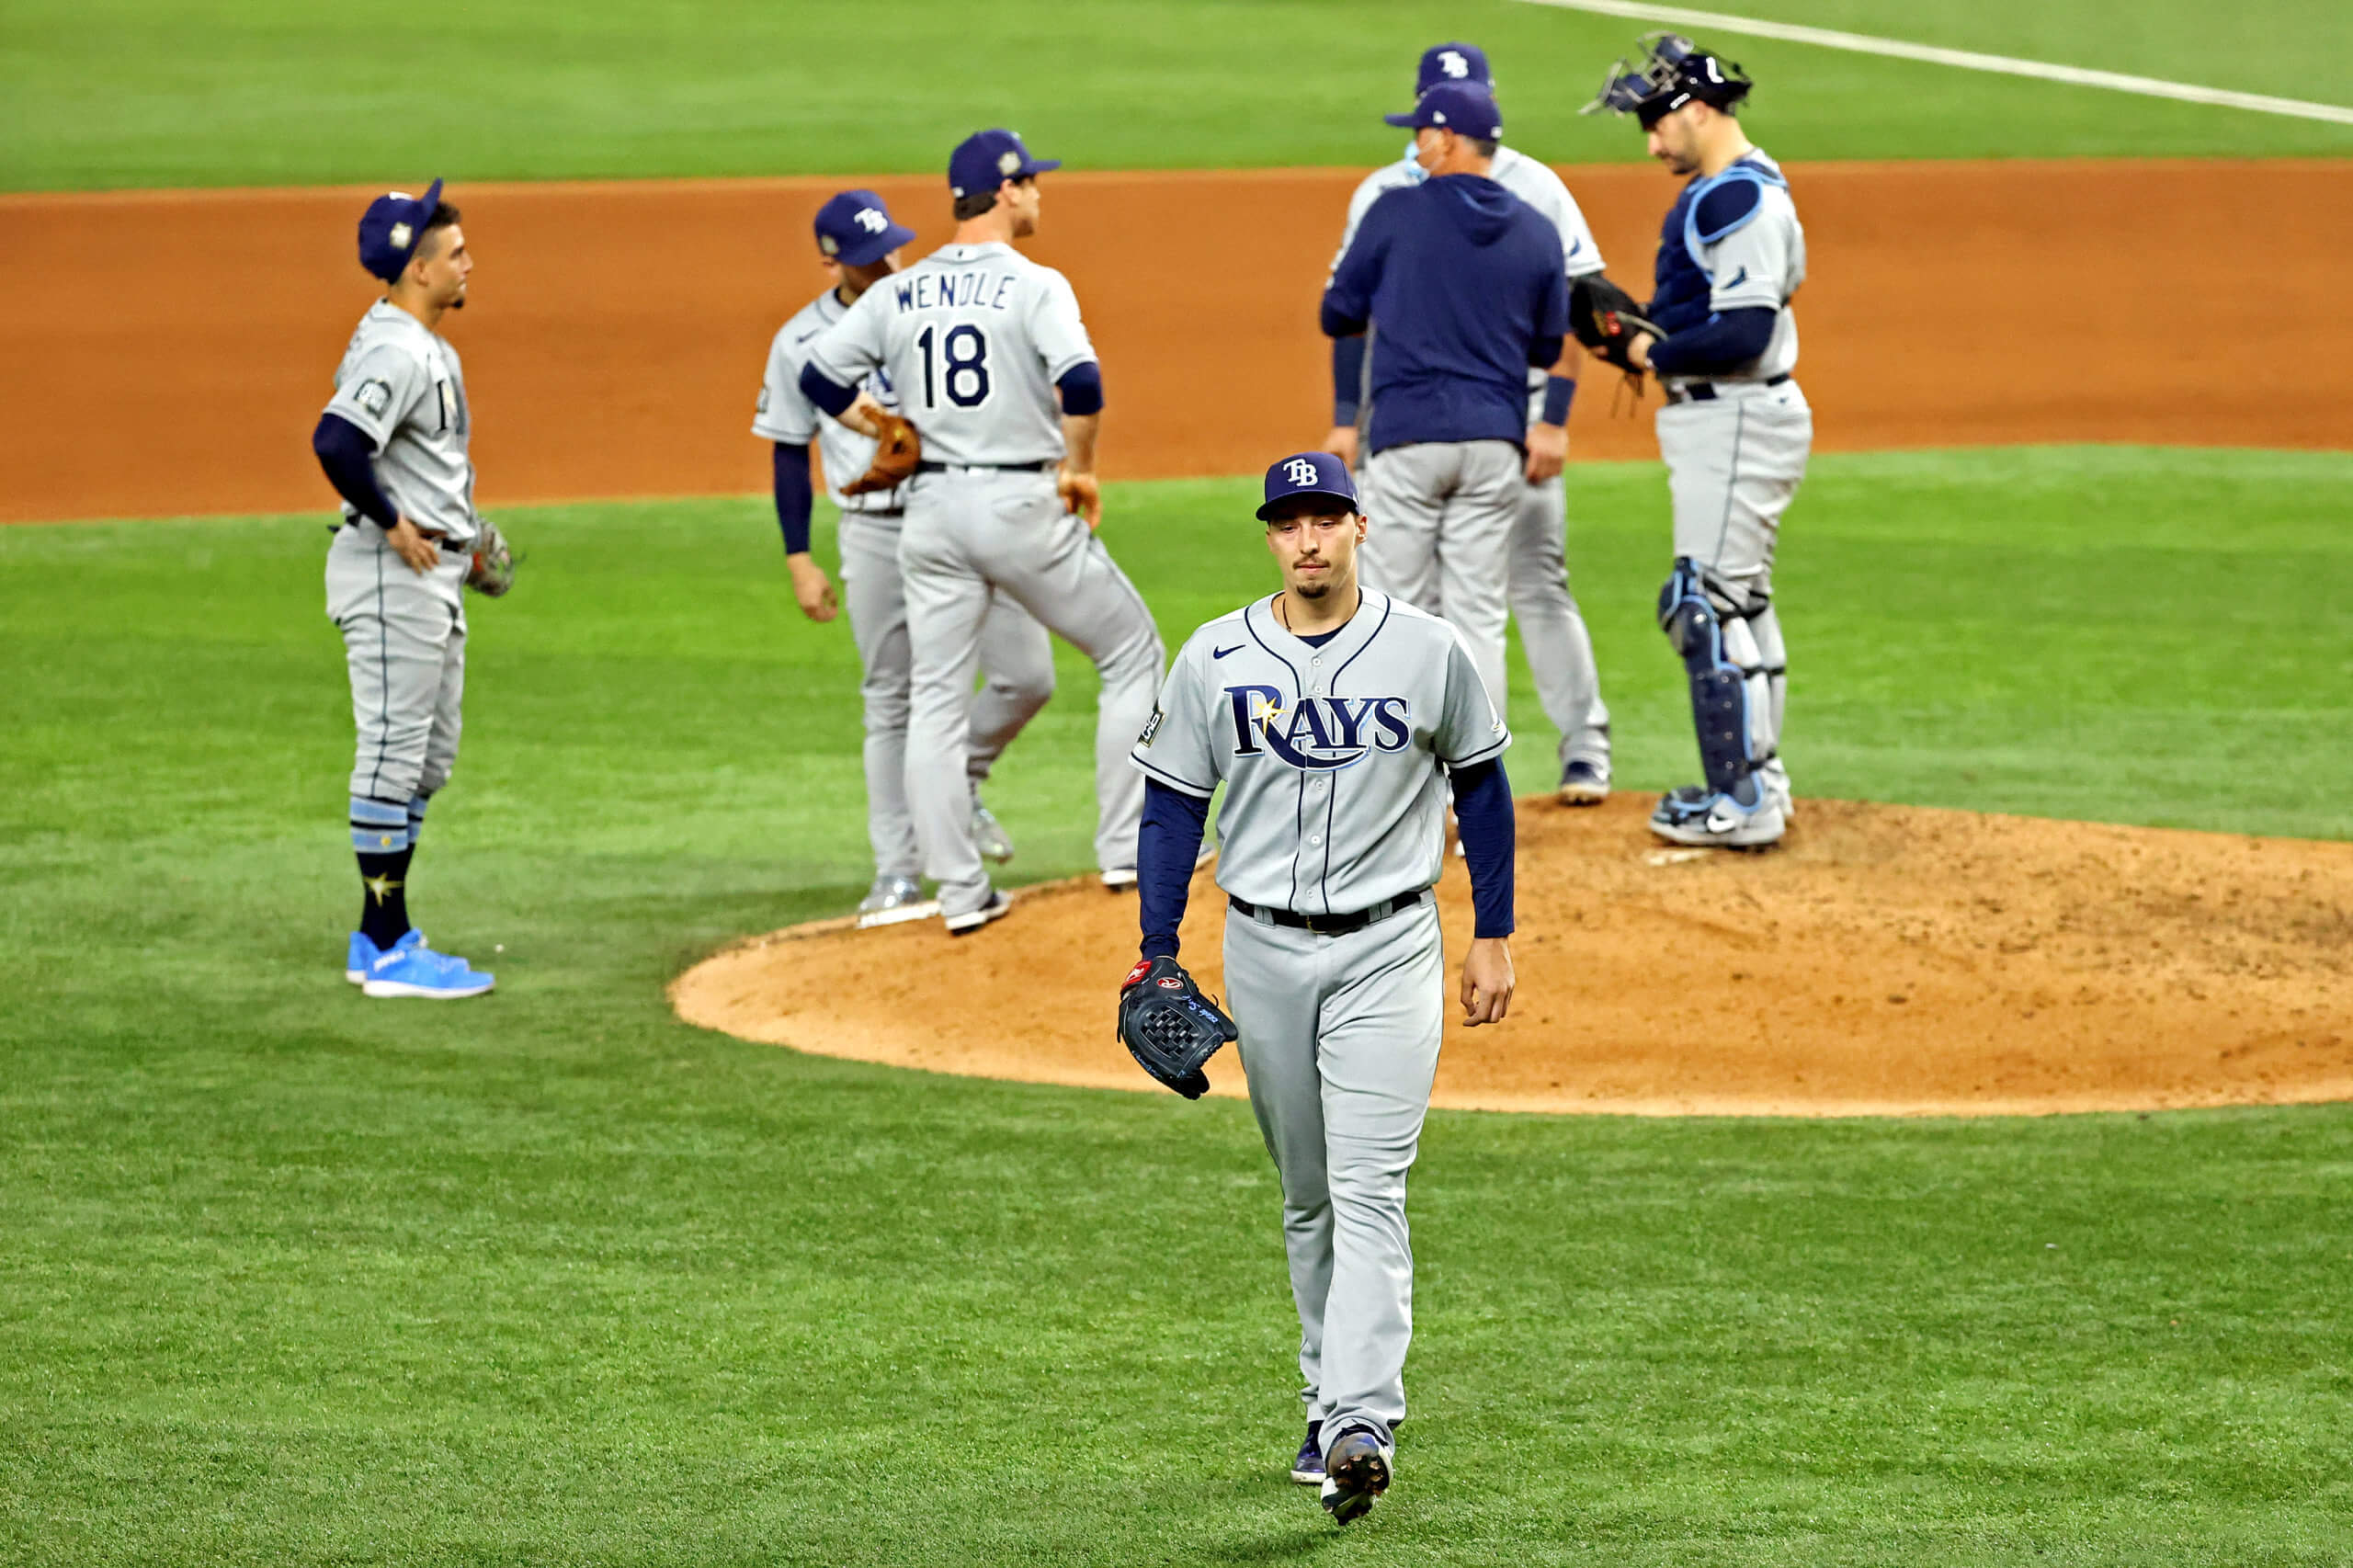 Dodgers win World Series after Rays' questionable Blake Snell decision